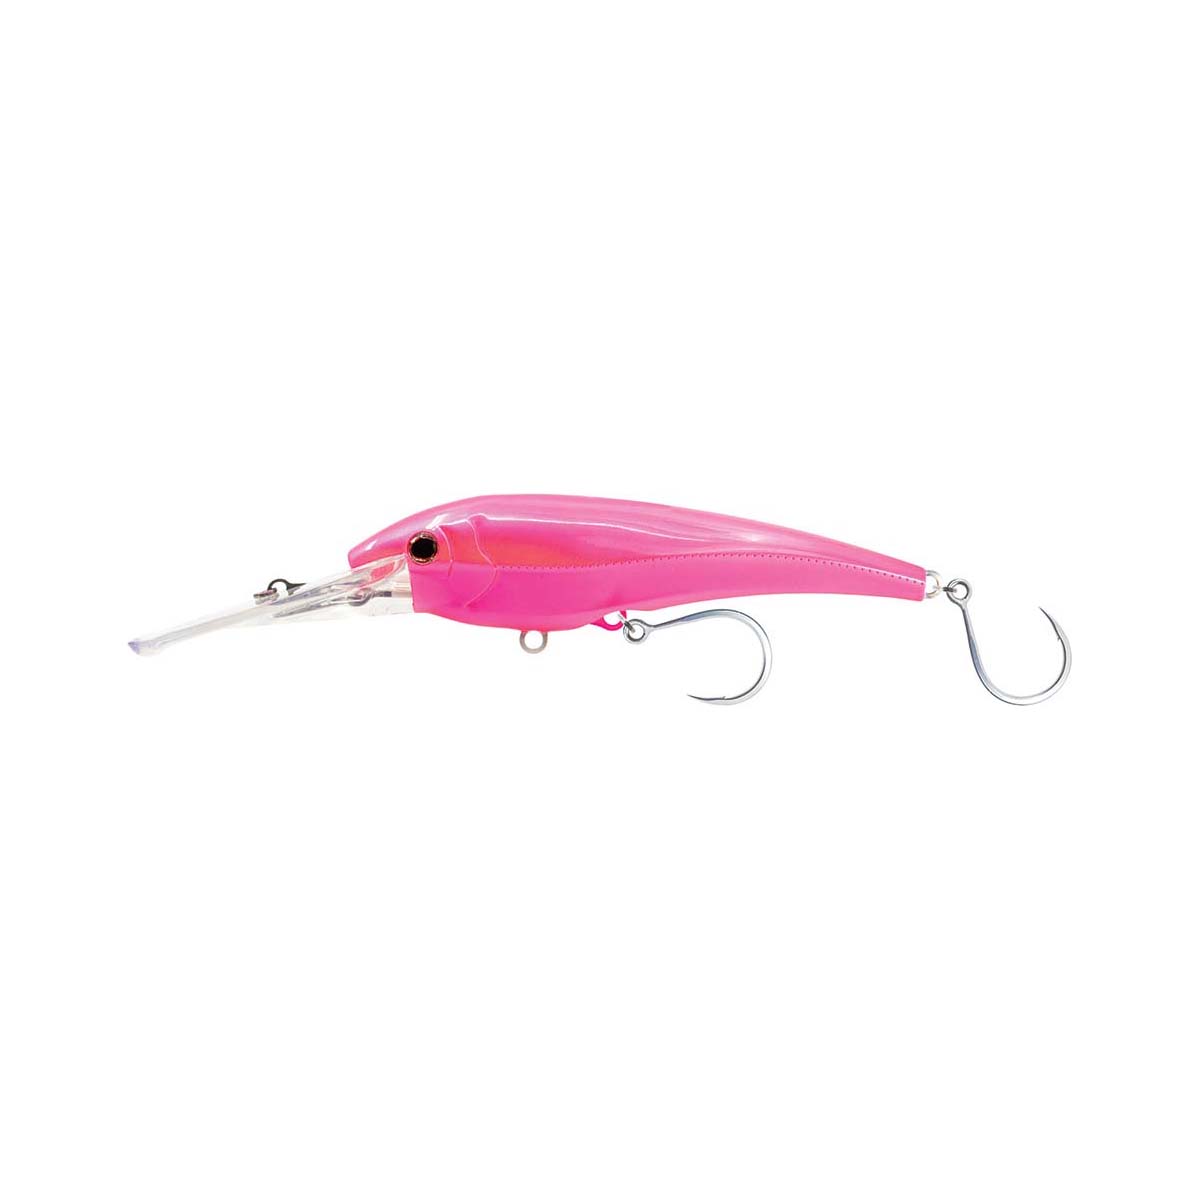 Nomad DTX Minnow Hard Body Lure 220mm Hot Pink @ Club BCF